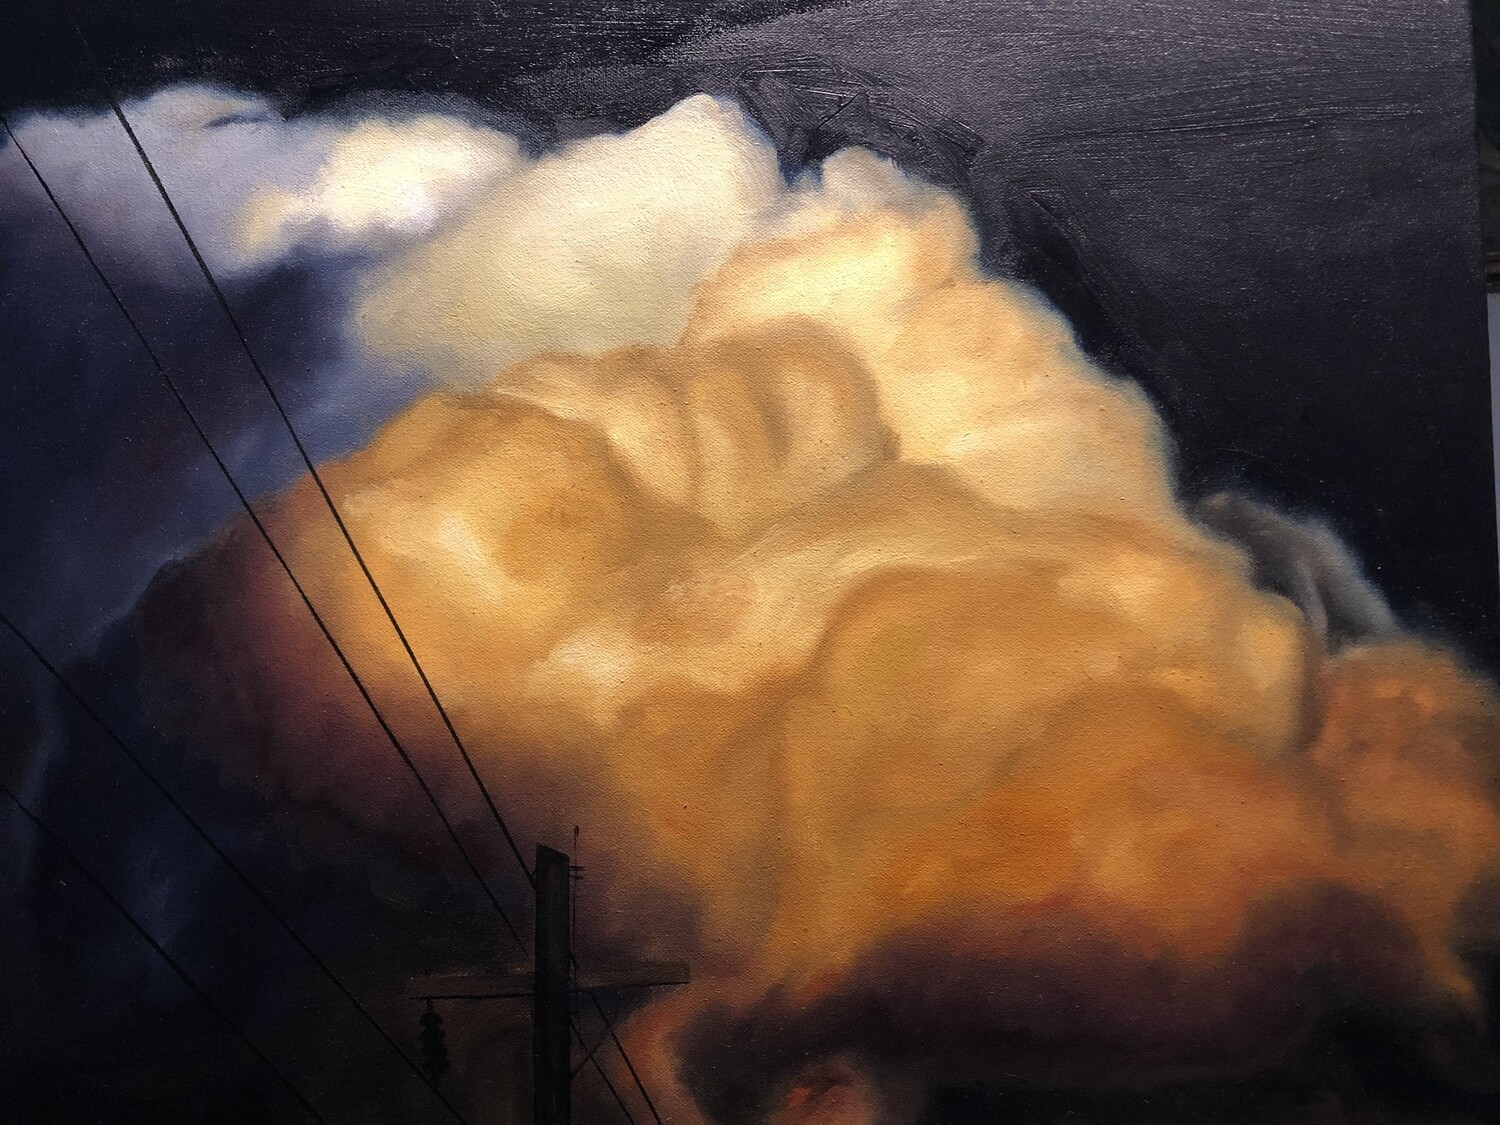 “Lines to heaven” oil on canvas 18x14 inches